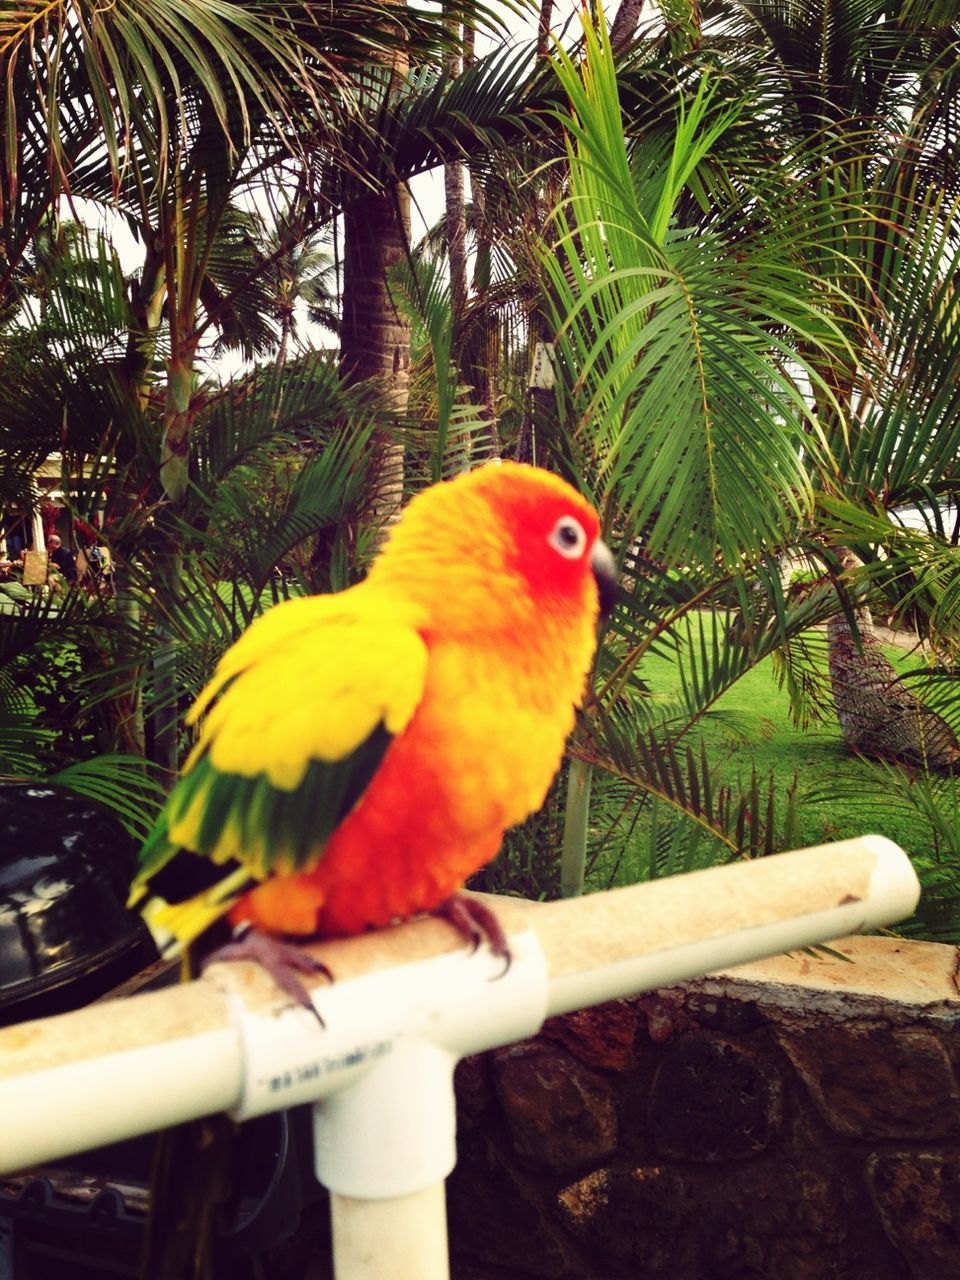 bird, animal themes, parrot, one animal, tree, animals in the wild, perching, branch, wildlife, beak, low angle view, close-up, nature, day, focus on foreground, outdoors, palm tree, cage, no people, multi colored